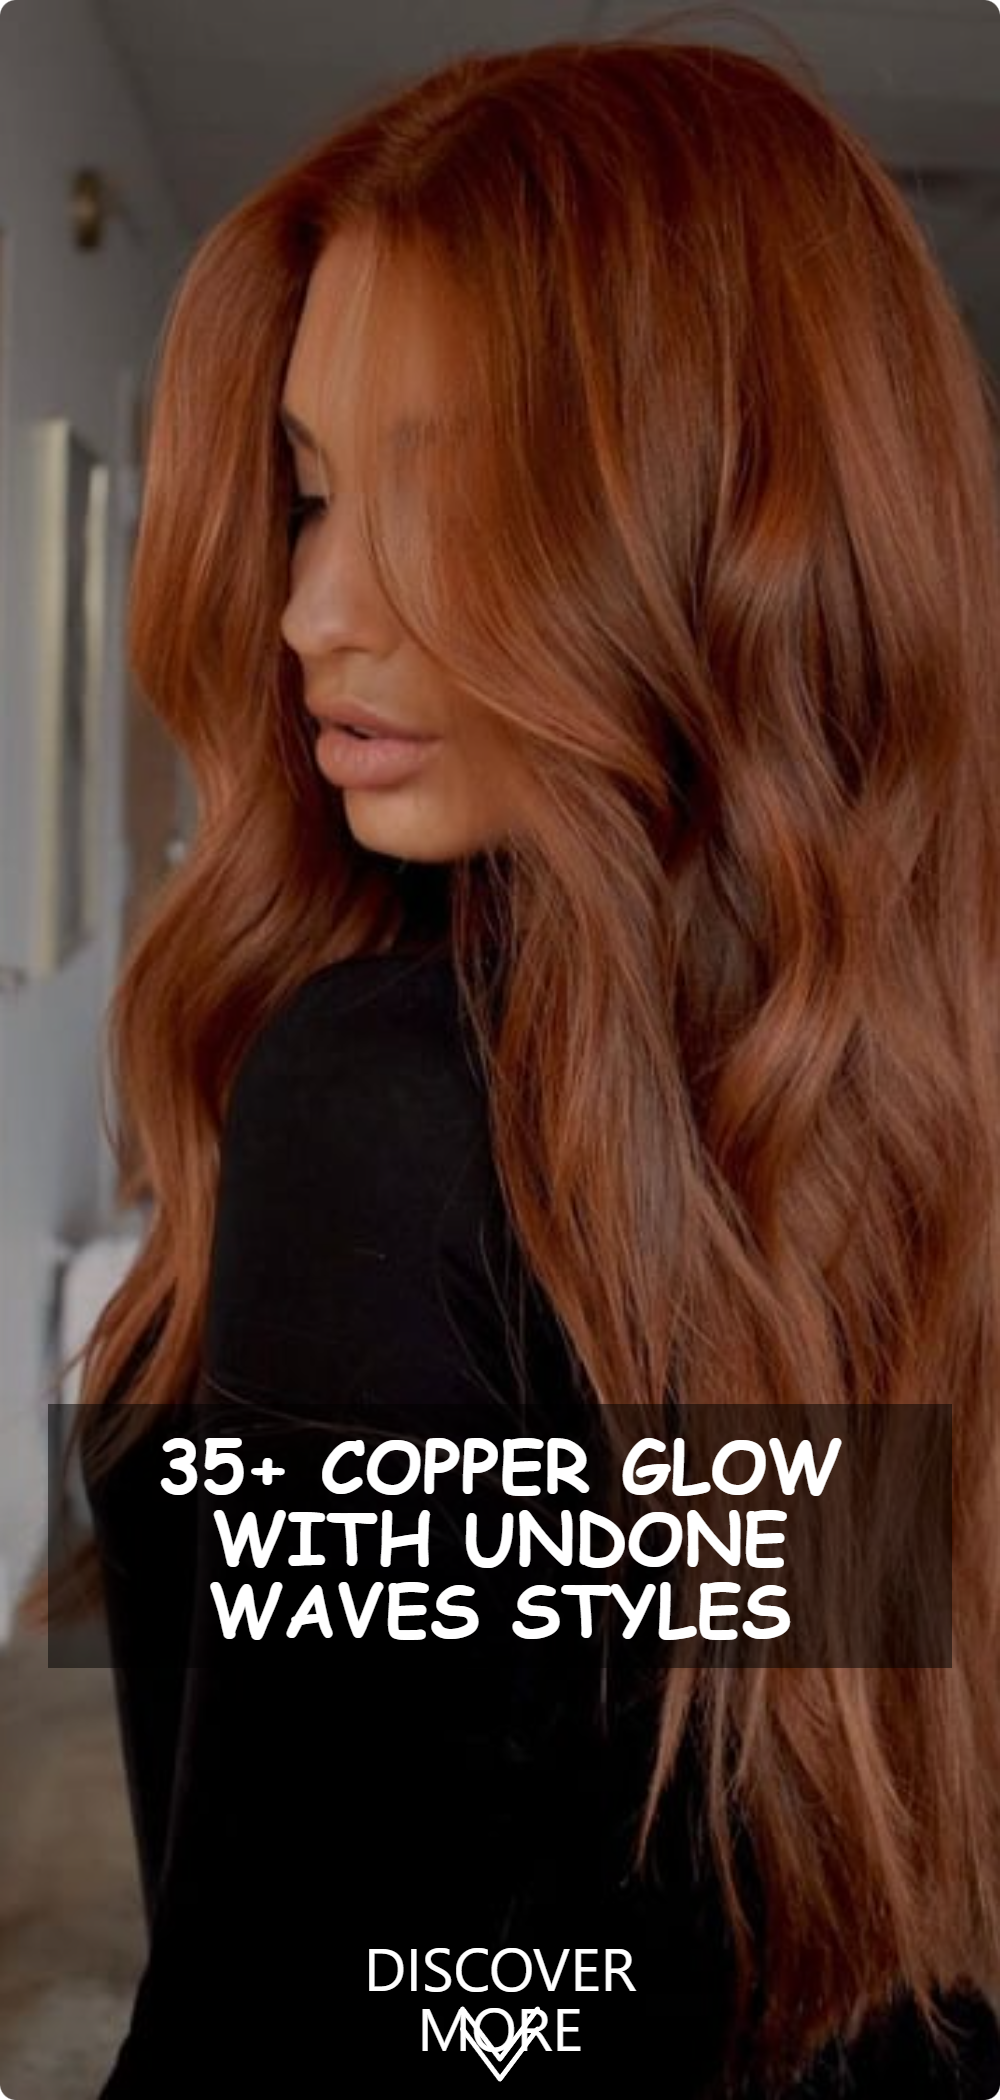 Copper Glow with Undone Waves